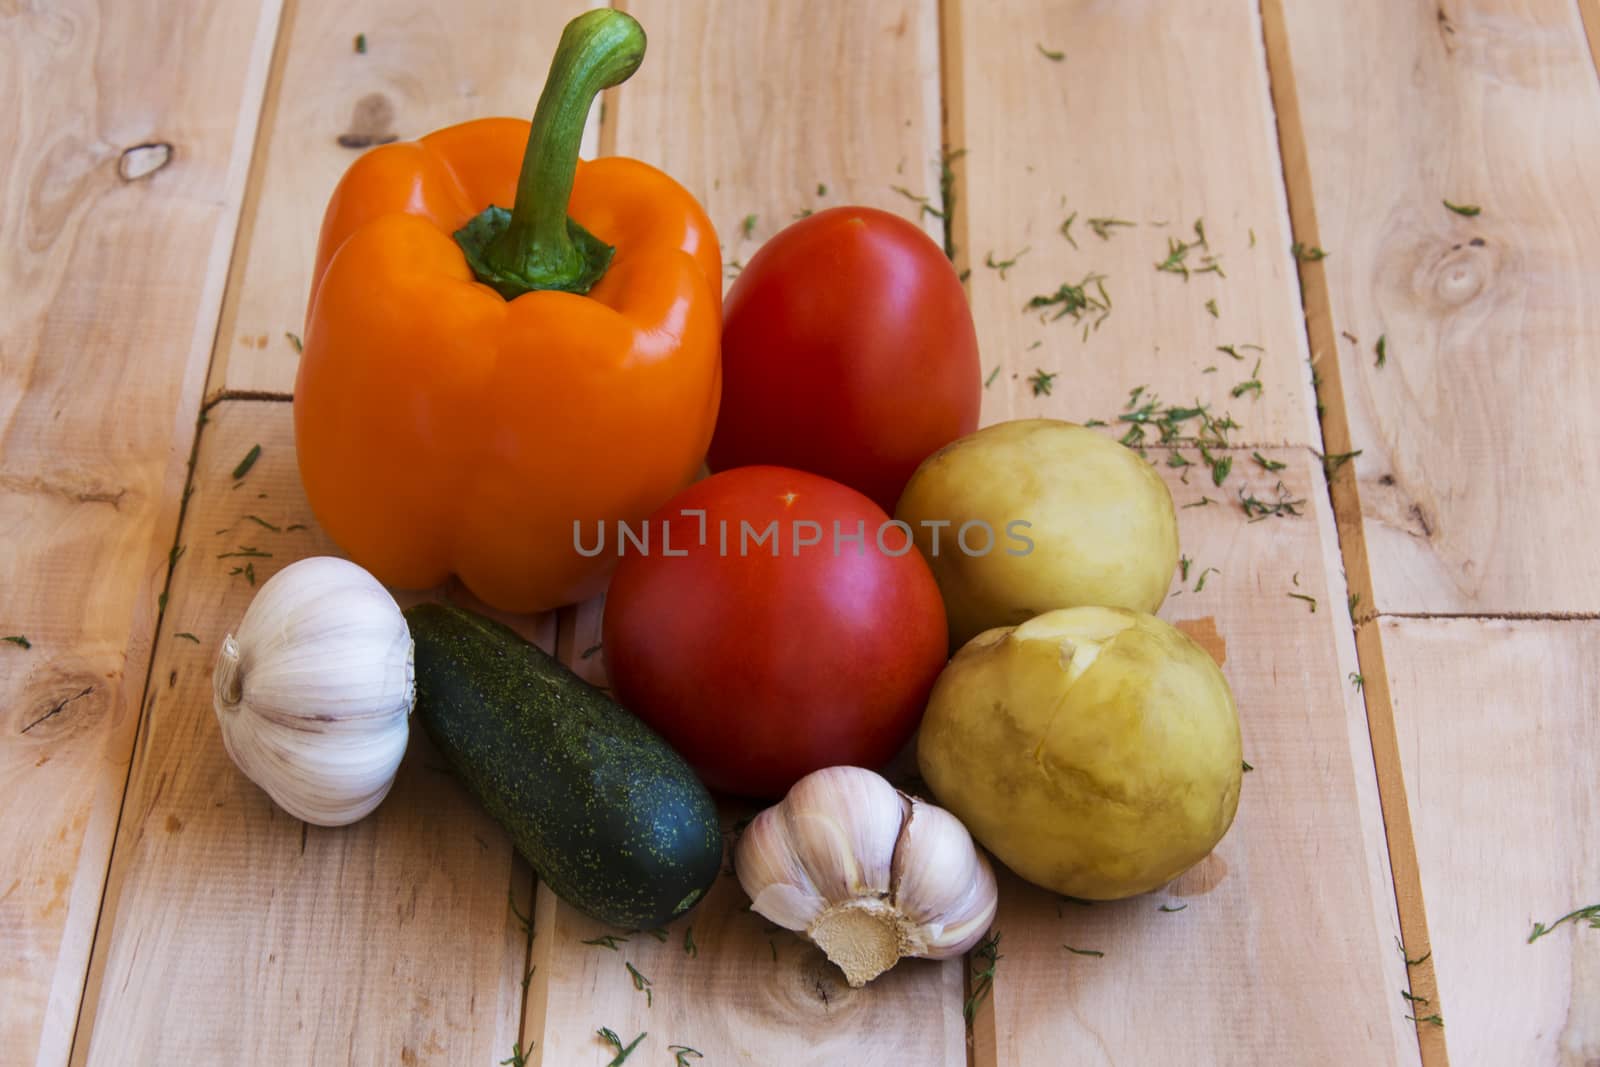 Potatoes, tomatoes, peppers, cucumbers and garlic on a wooden su by Grommik